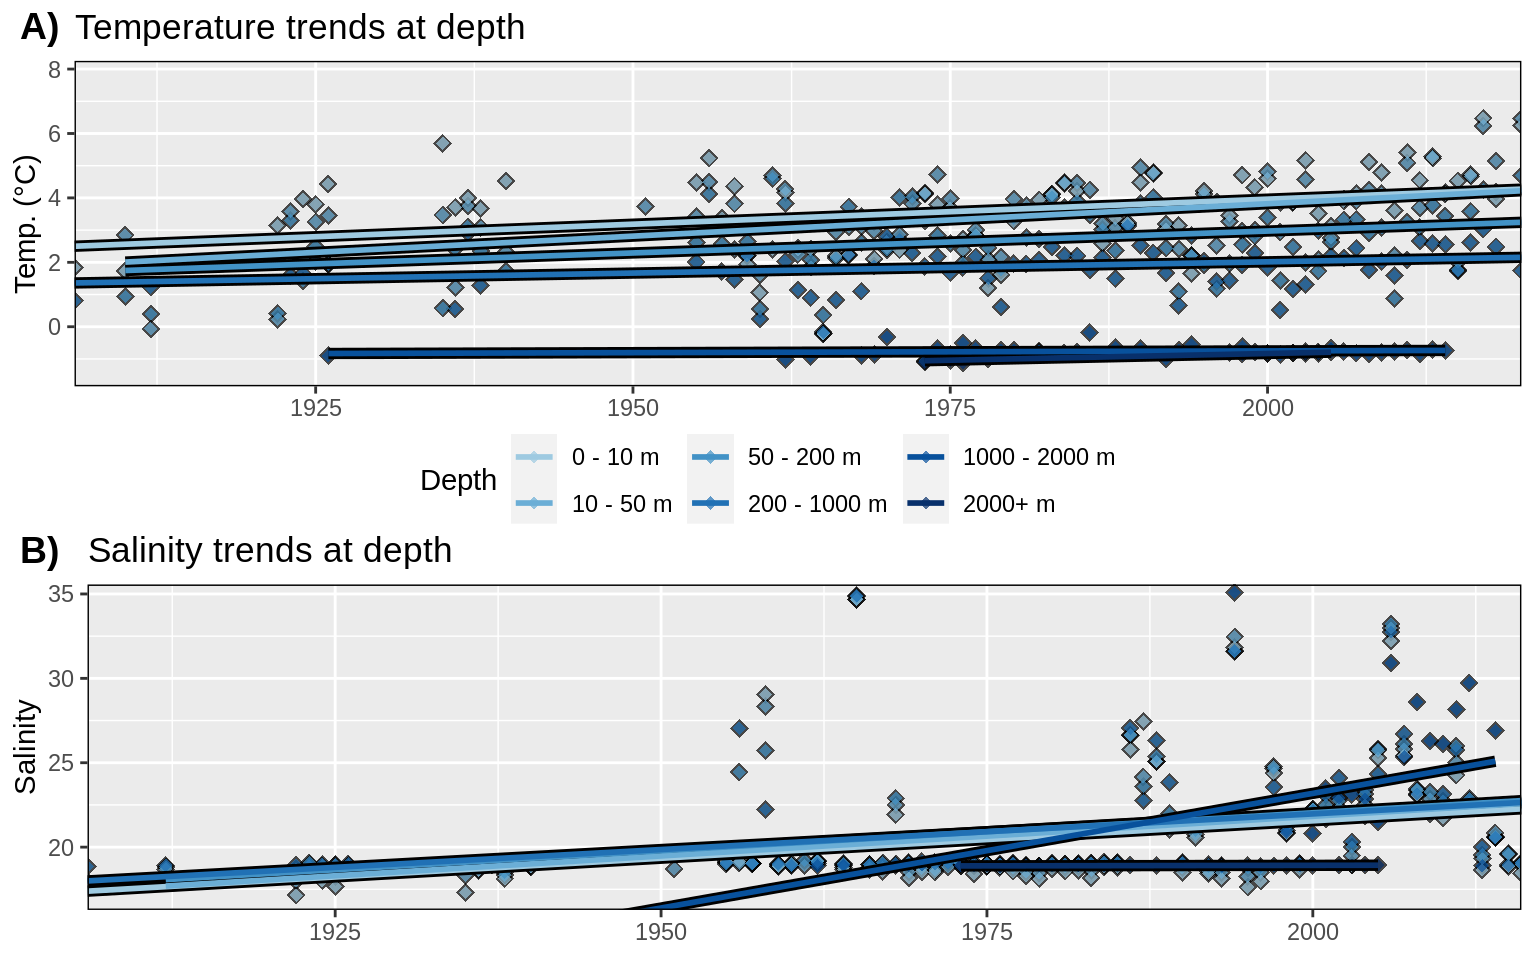 __Figure 3:__ Trends in A) temperature and B) salinity at different depth groups. The average annual values for all data are shown as diamonds, and the annual trends for these values are shown as coloured lines. There also appear to be two different types of salinity measurements. A long record of values close to 20 and a more recent addition of higher values around 32-35. One assumes that the lower values are measures of runoff and not proper ocean water.